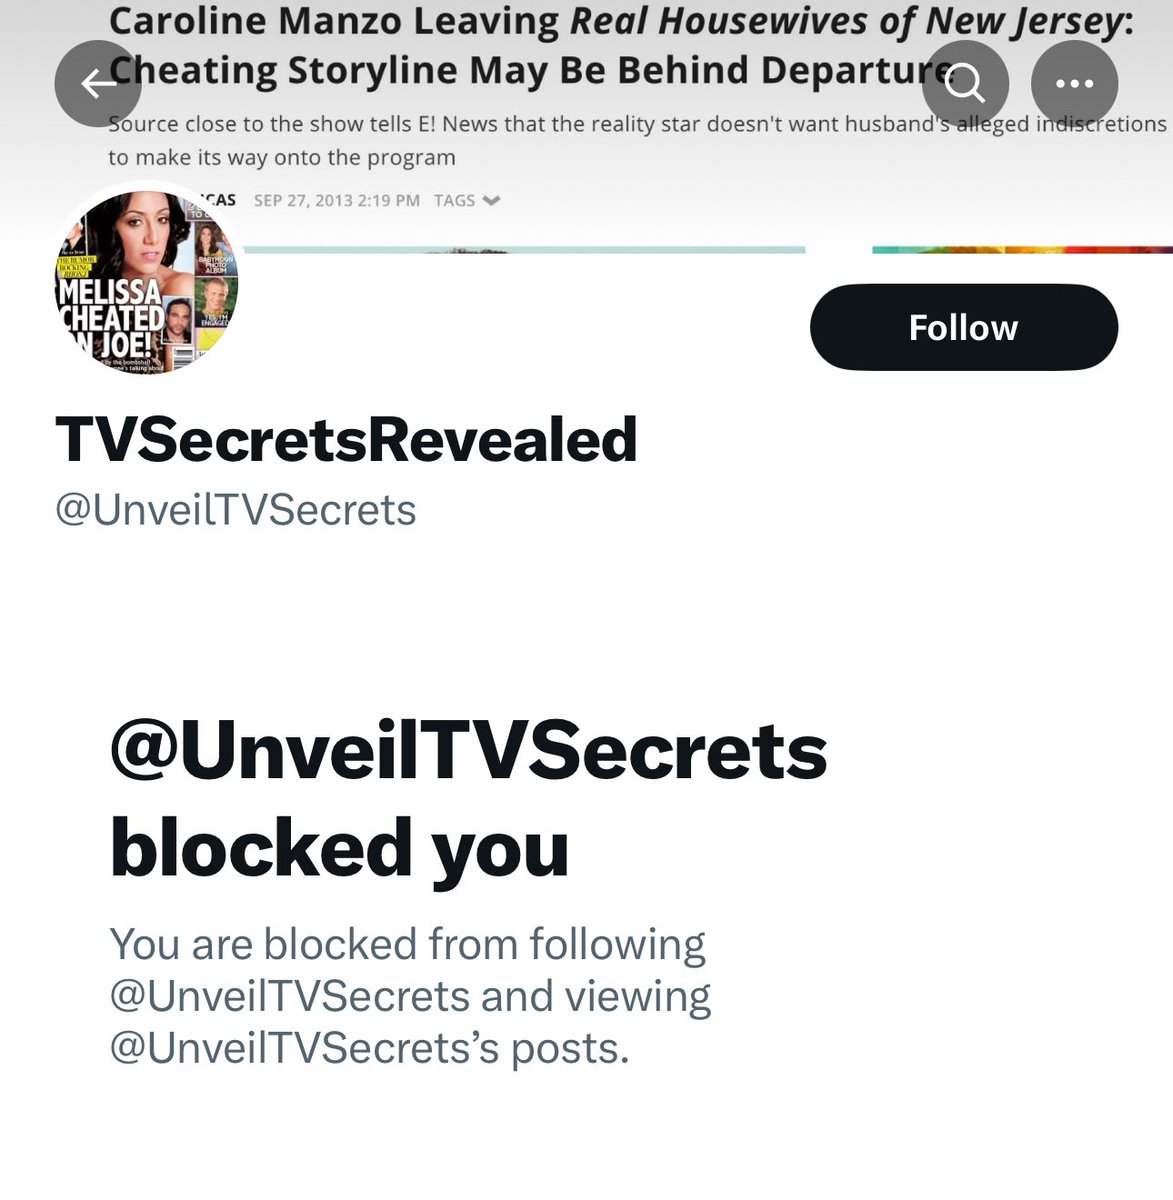 Lookie what I found today…the mysterious #RHONJ fan account that leaked John Fuda’s alleged business blocked me lol 😂 if that does not scream Teresa and Jen. 😵‍💫😵‍💫😵‍💫😵‍💫